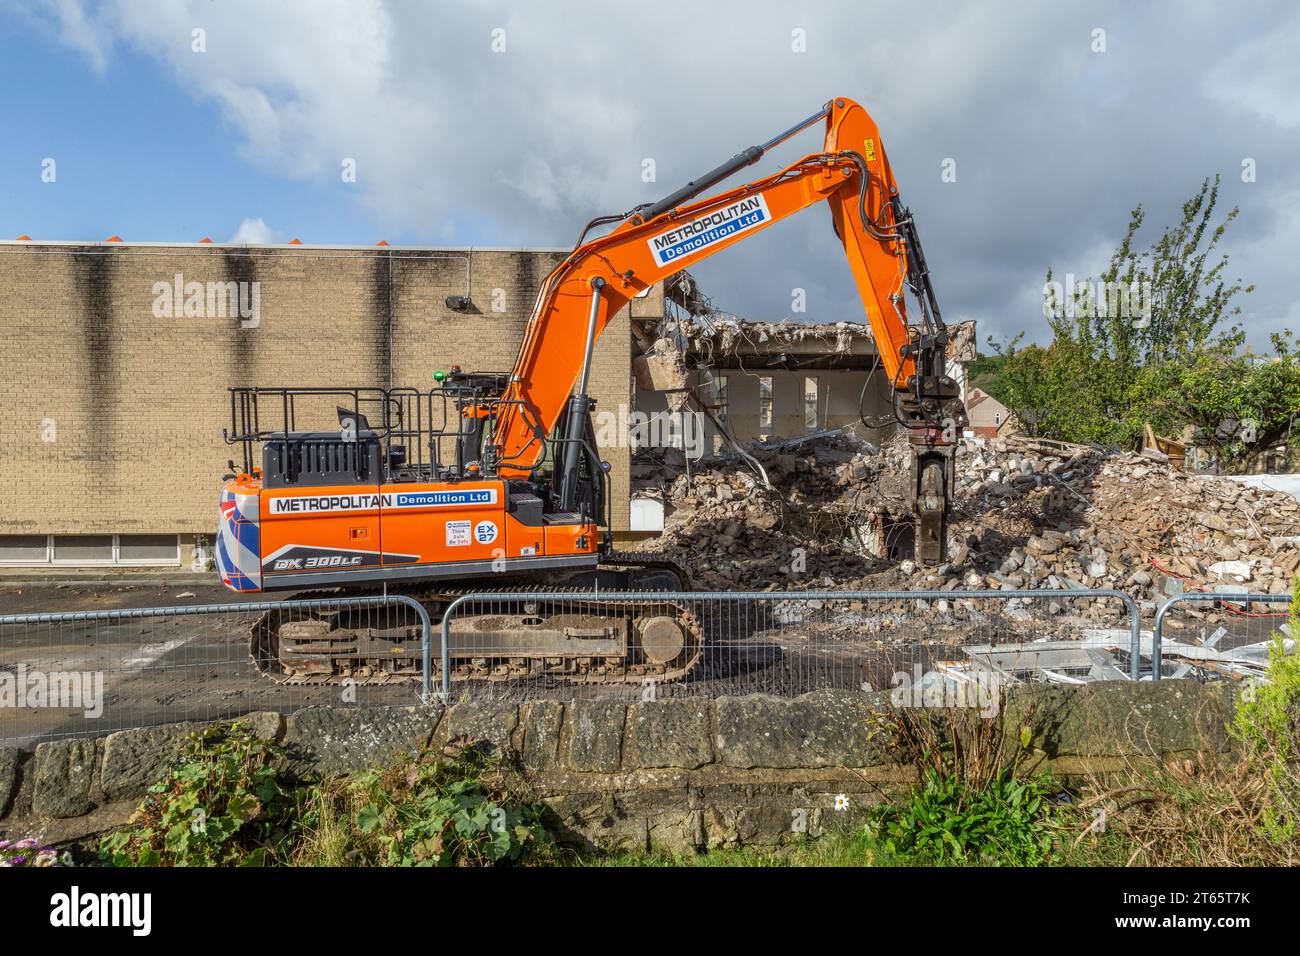 The Demolition of Ian Clough Hall and Baildon Library in Baildon, Yorkshire. The council buildings were demolished to be replaced by apartments. Stock Photo